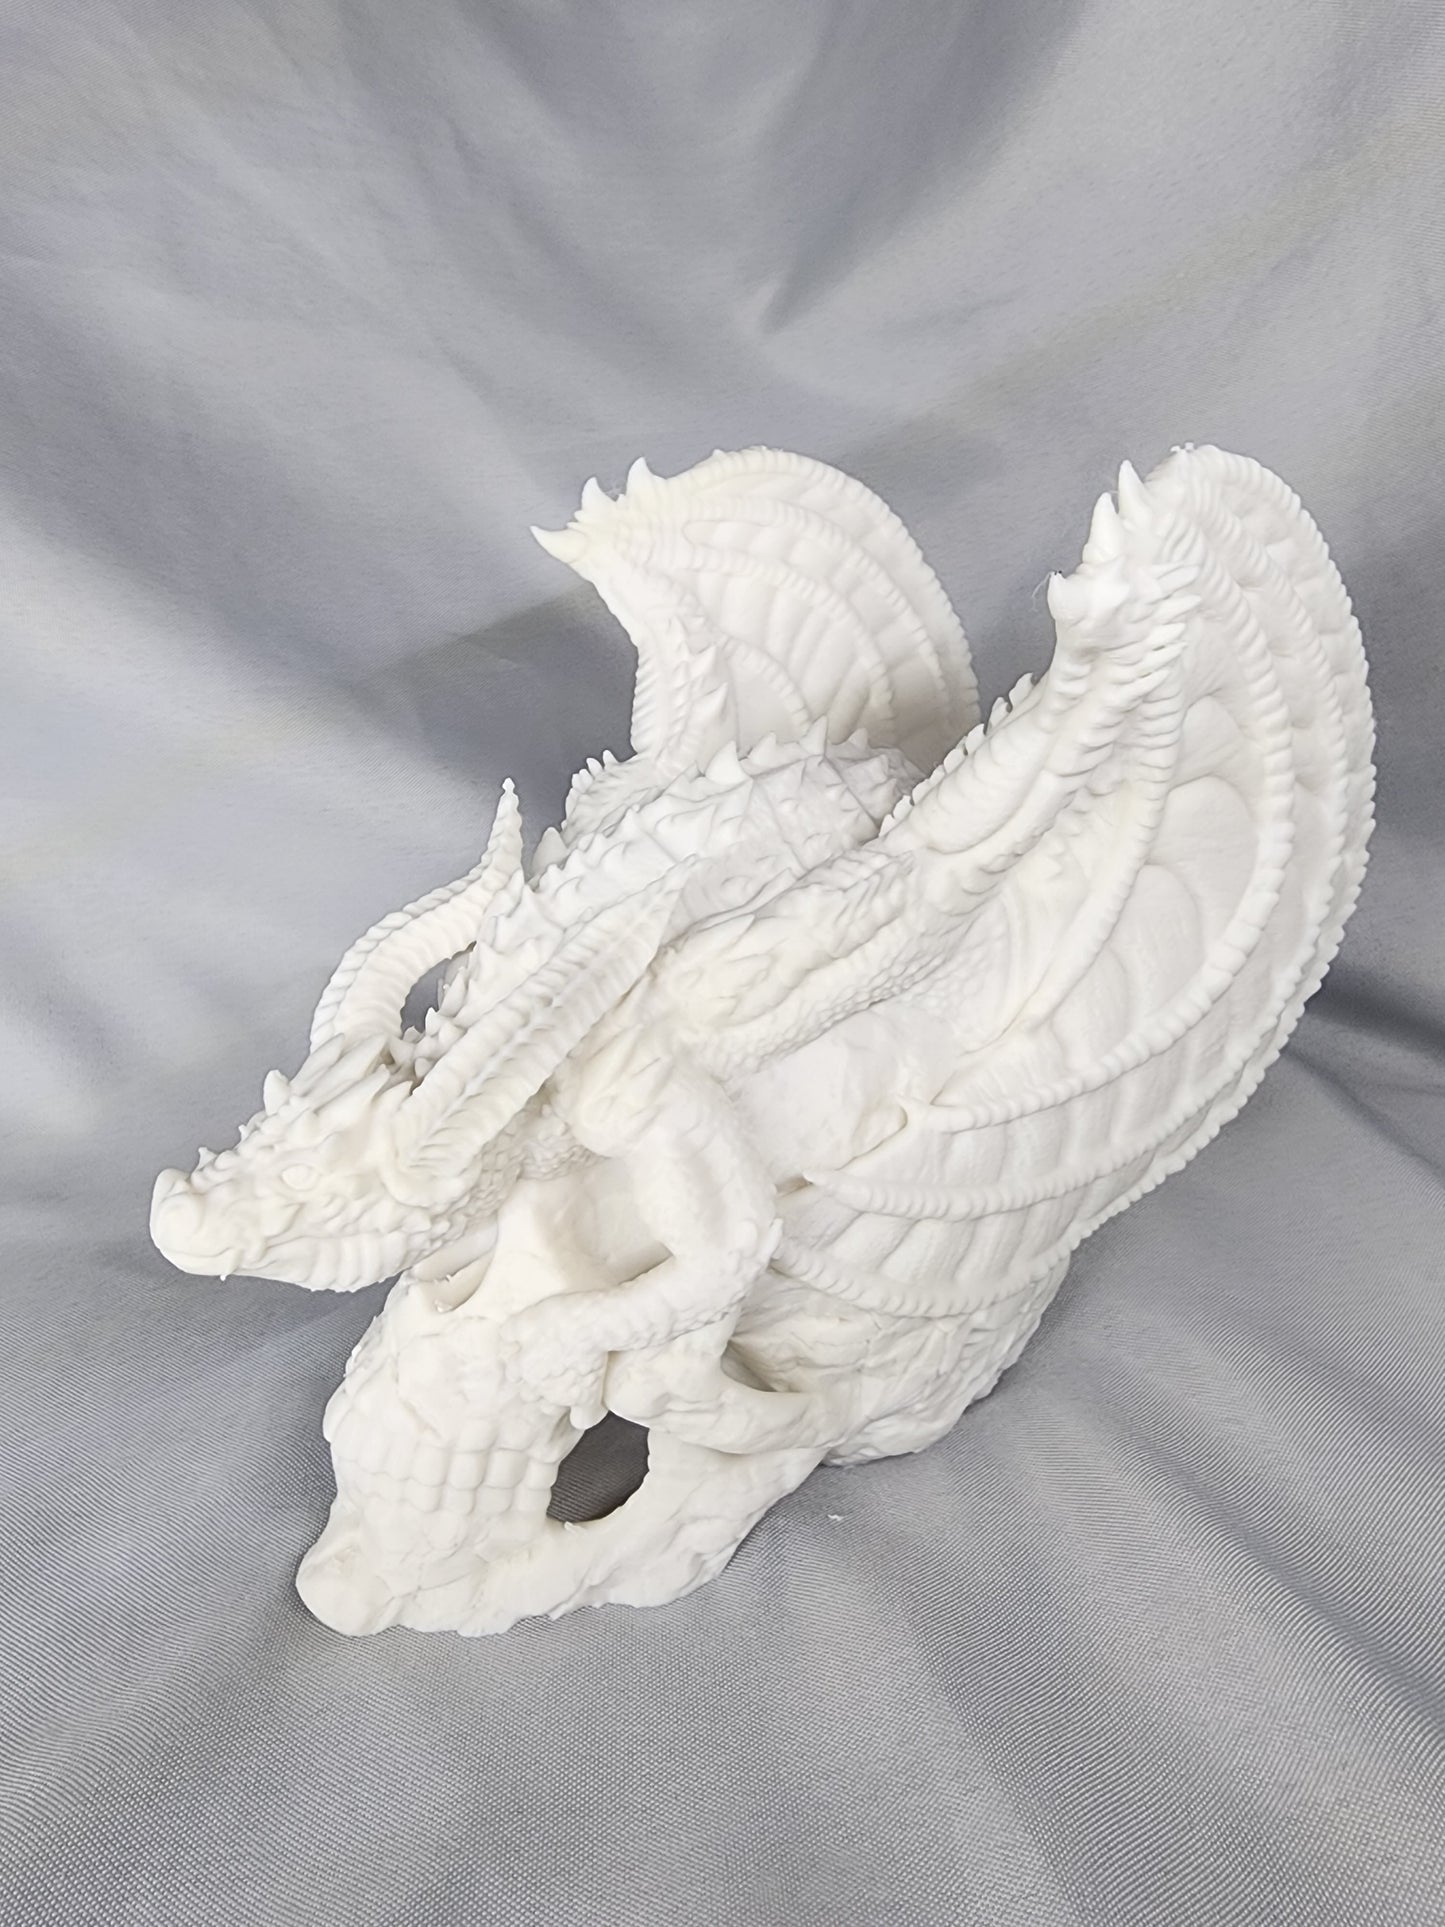 Dragon perched on skull decoration for home or office whether it's Halloween or any other time of year